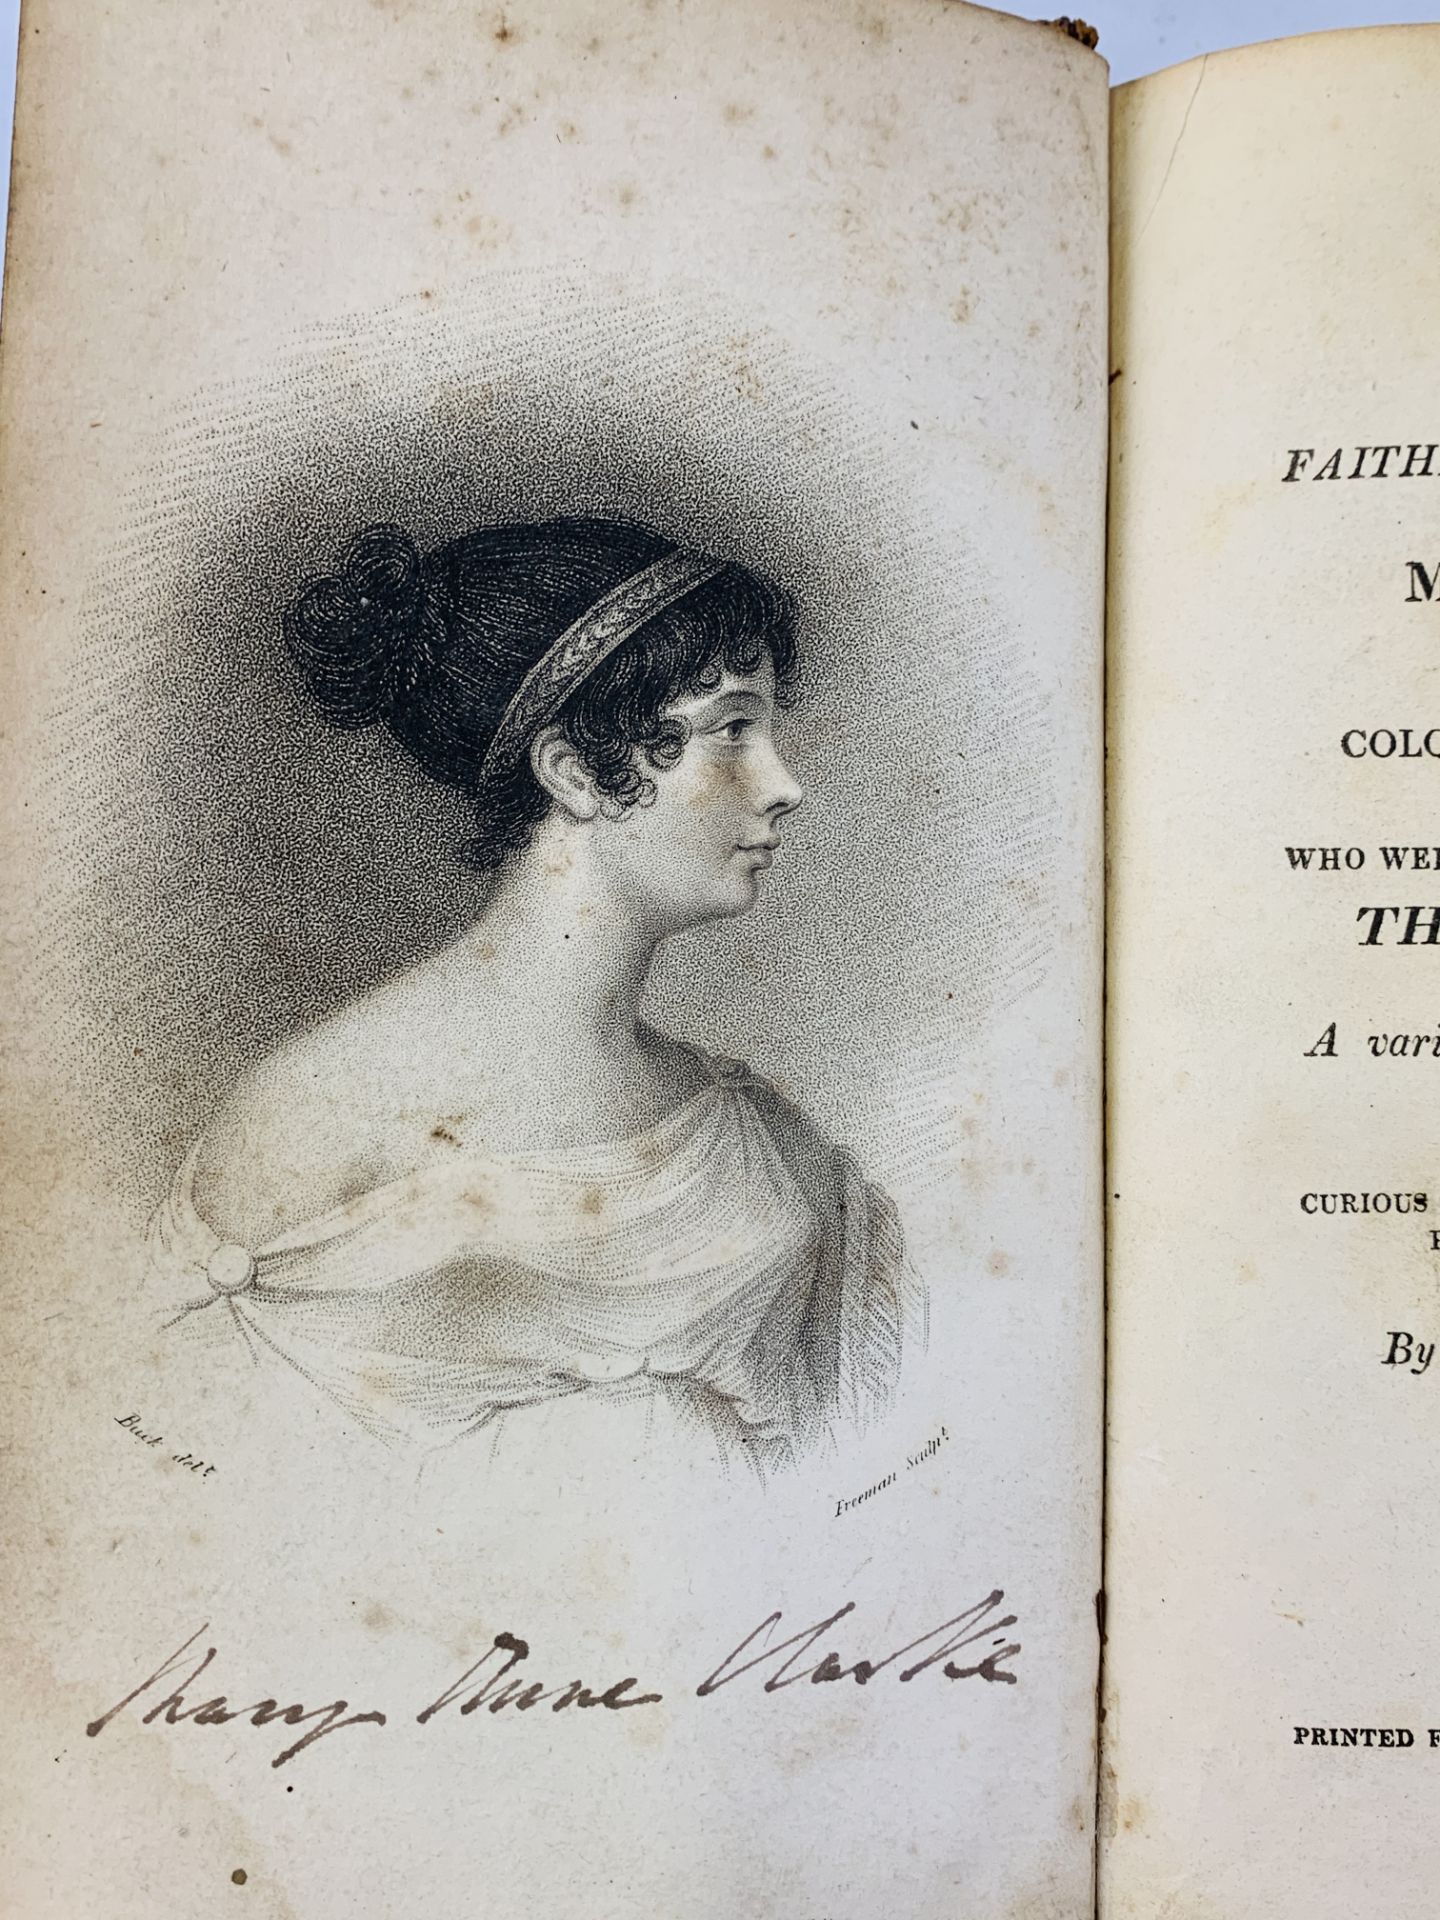 The Rival Princes by Mary Anne Clarke, 1810, 2 volumes bound in one - Image 3 of 5